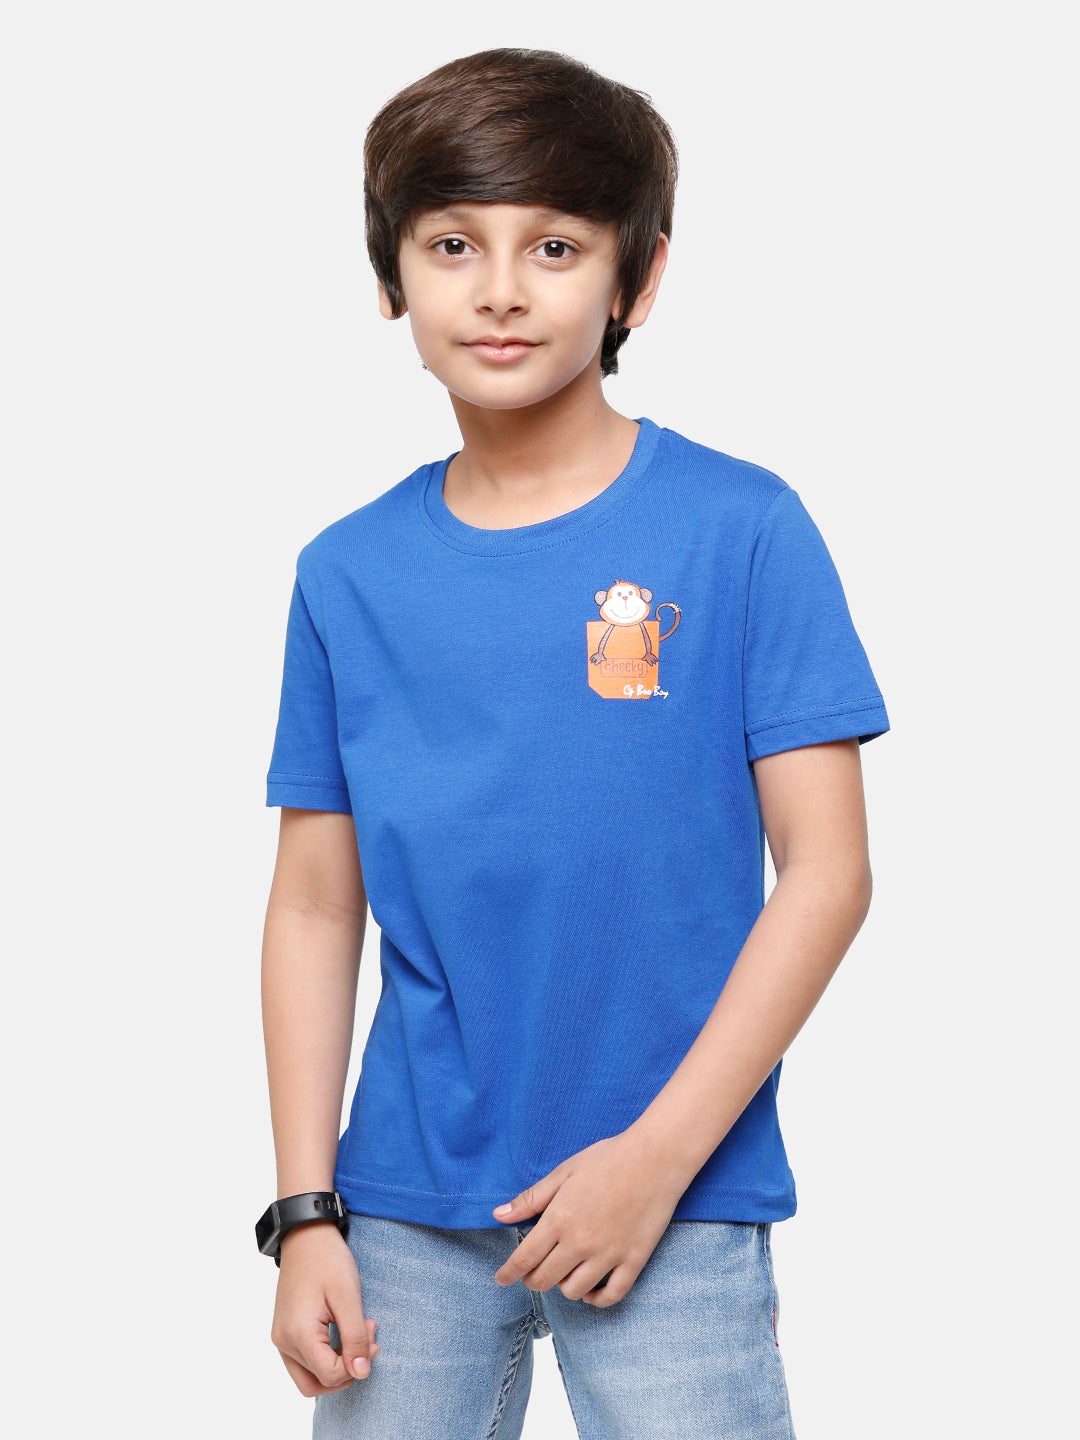 CP Boys Navy Printed Slim Fit Round Neck T-Shirt T-shirt Classic Polo 